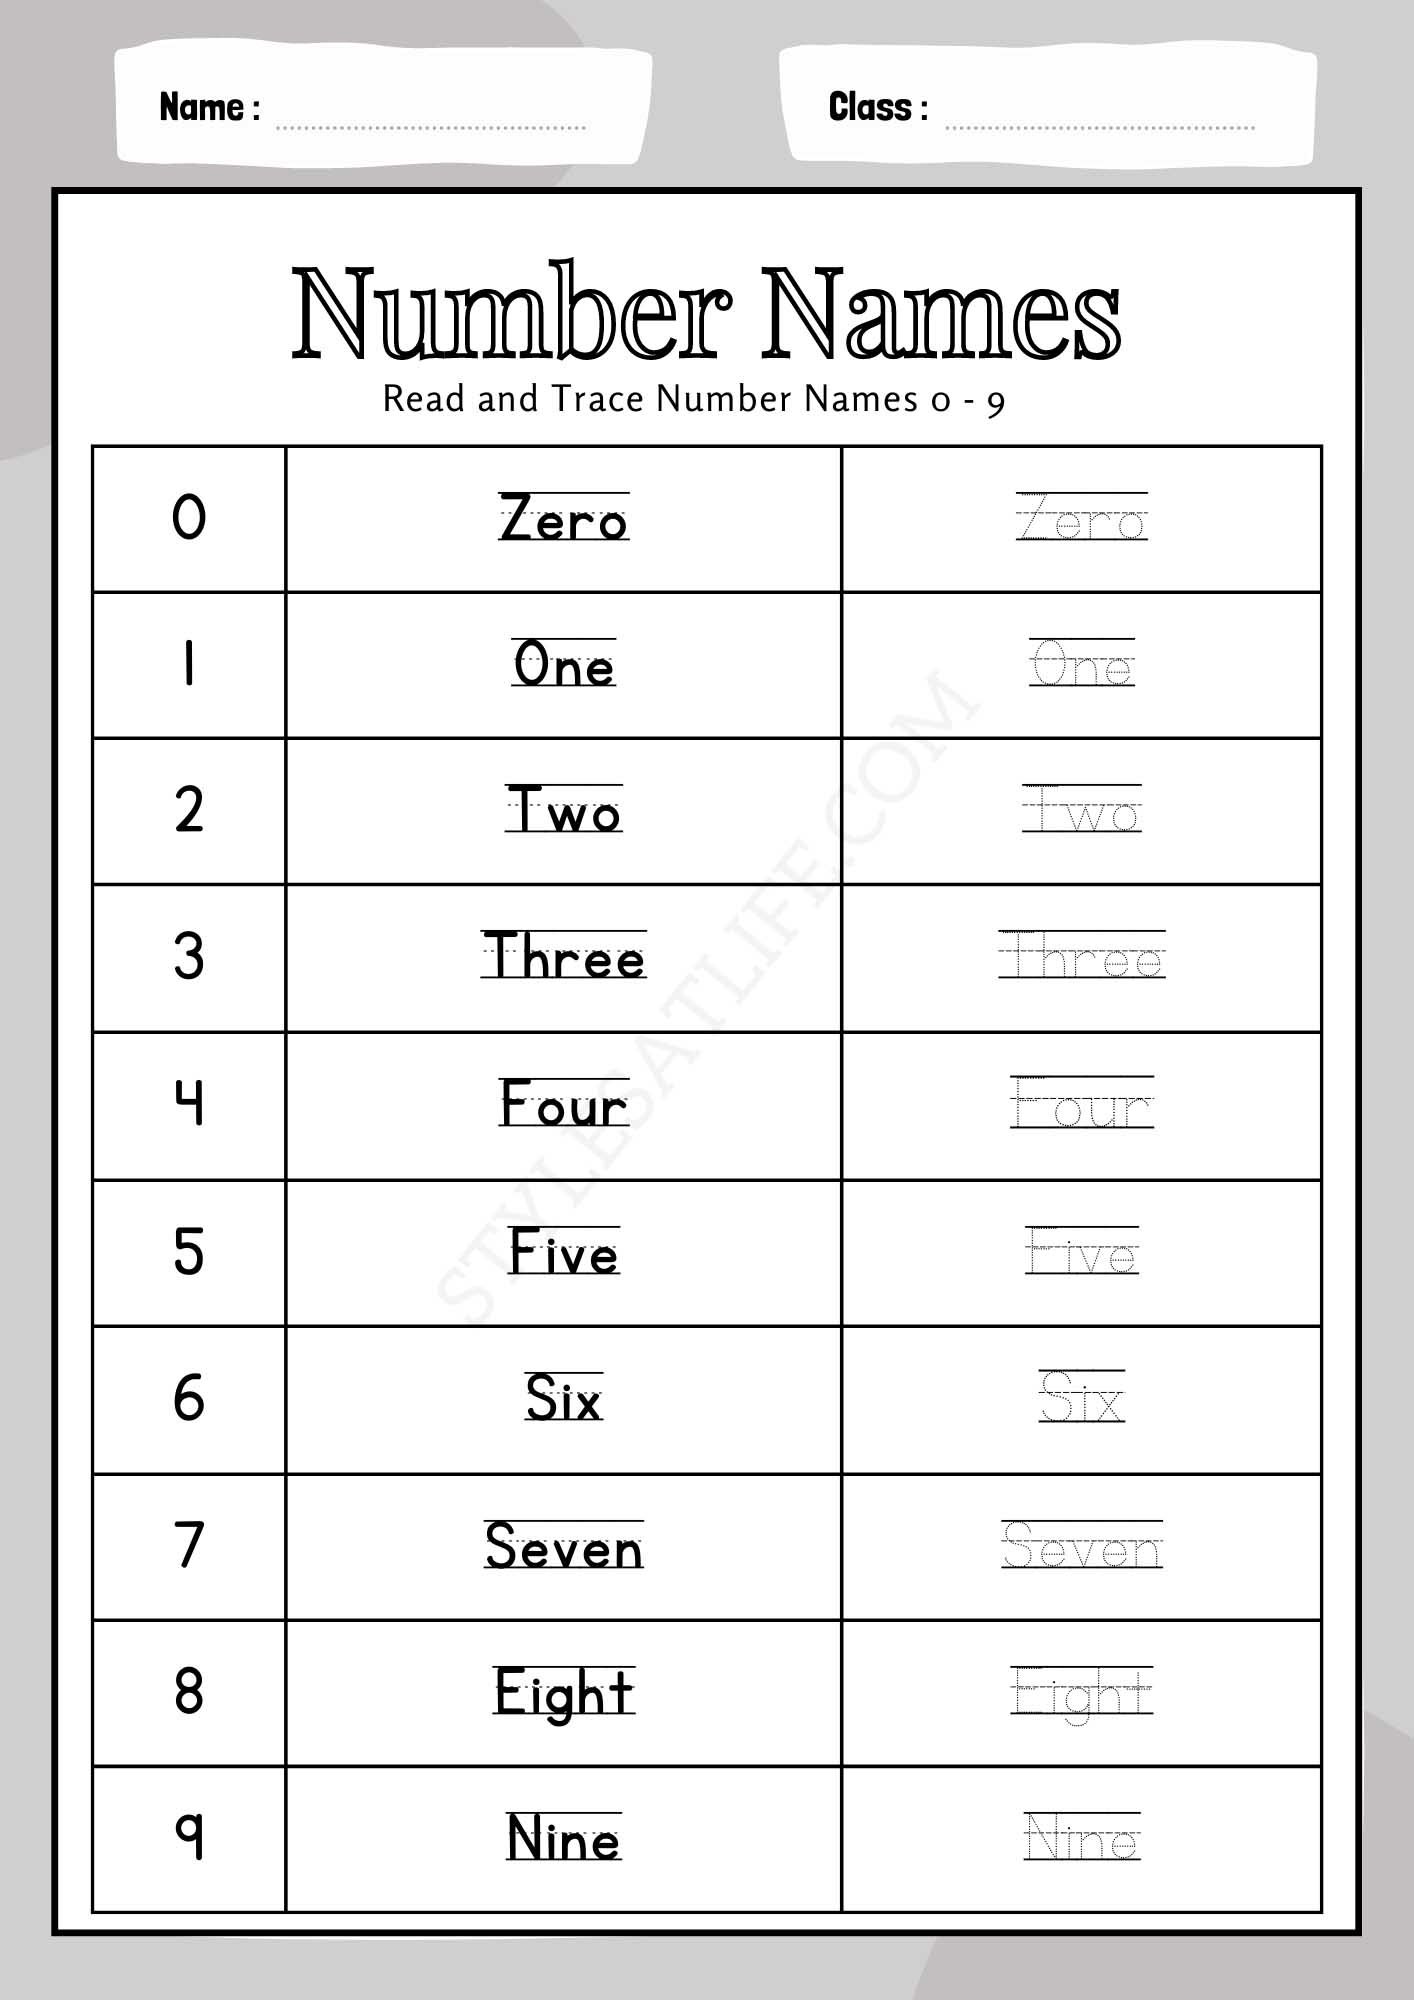 Number Name